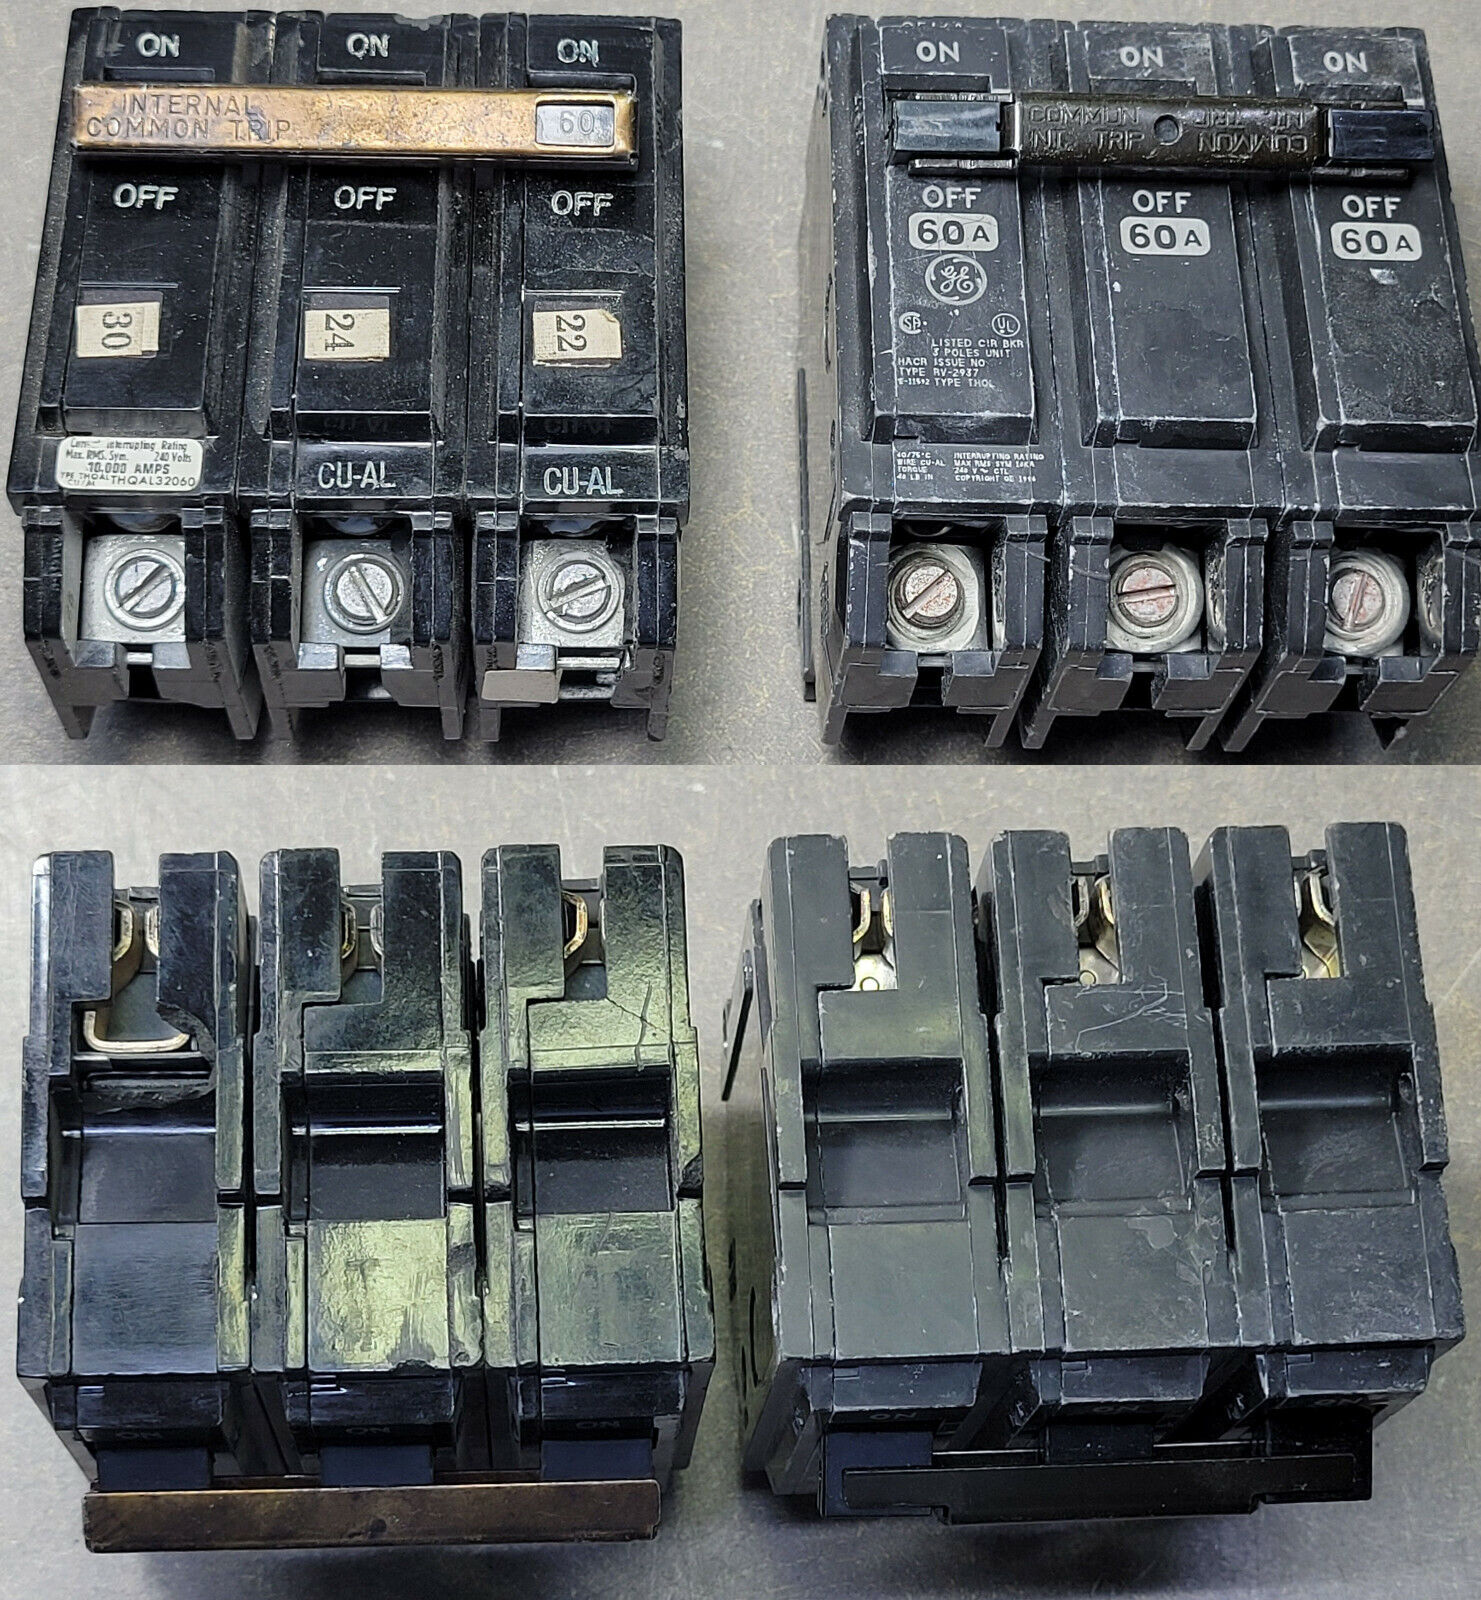 Lot of 2 GE THQAL32060 & E11592 Cir Brk Type THQAL 60A 240V.